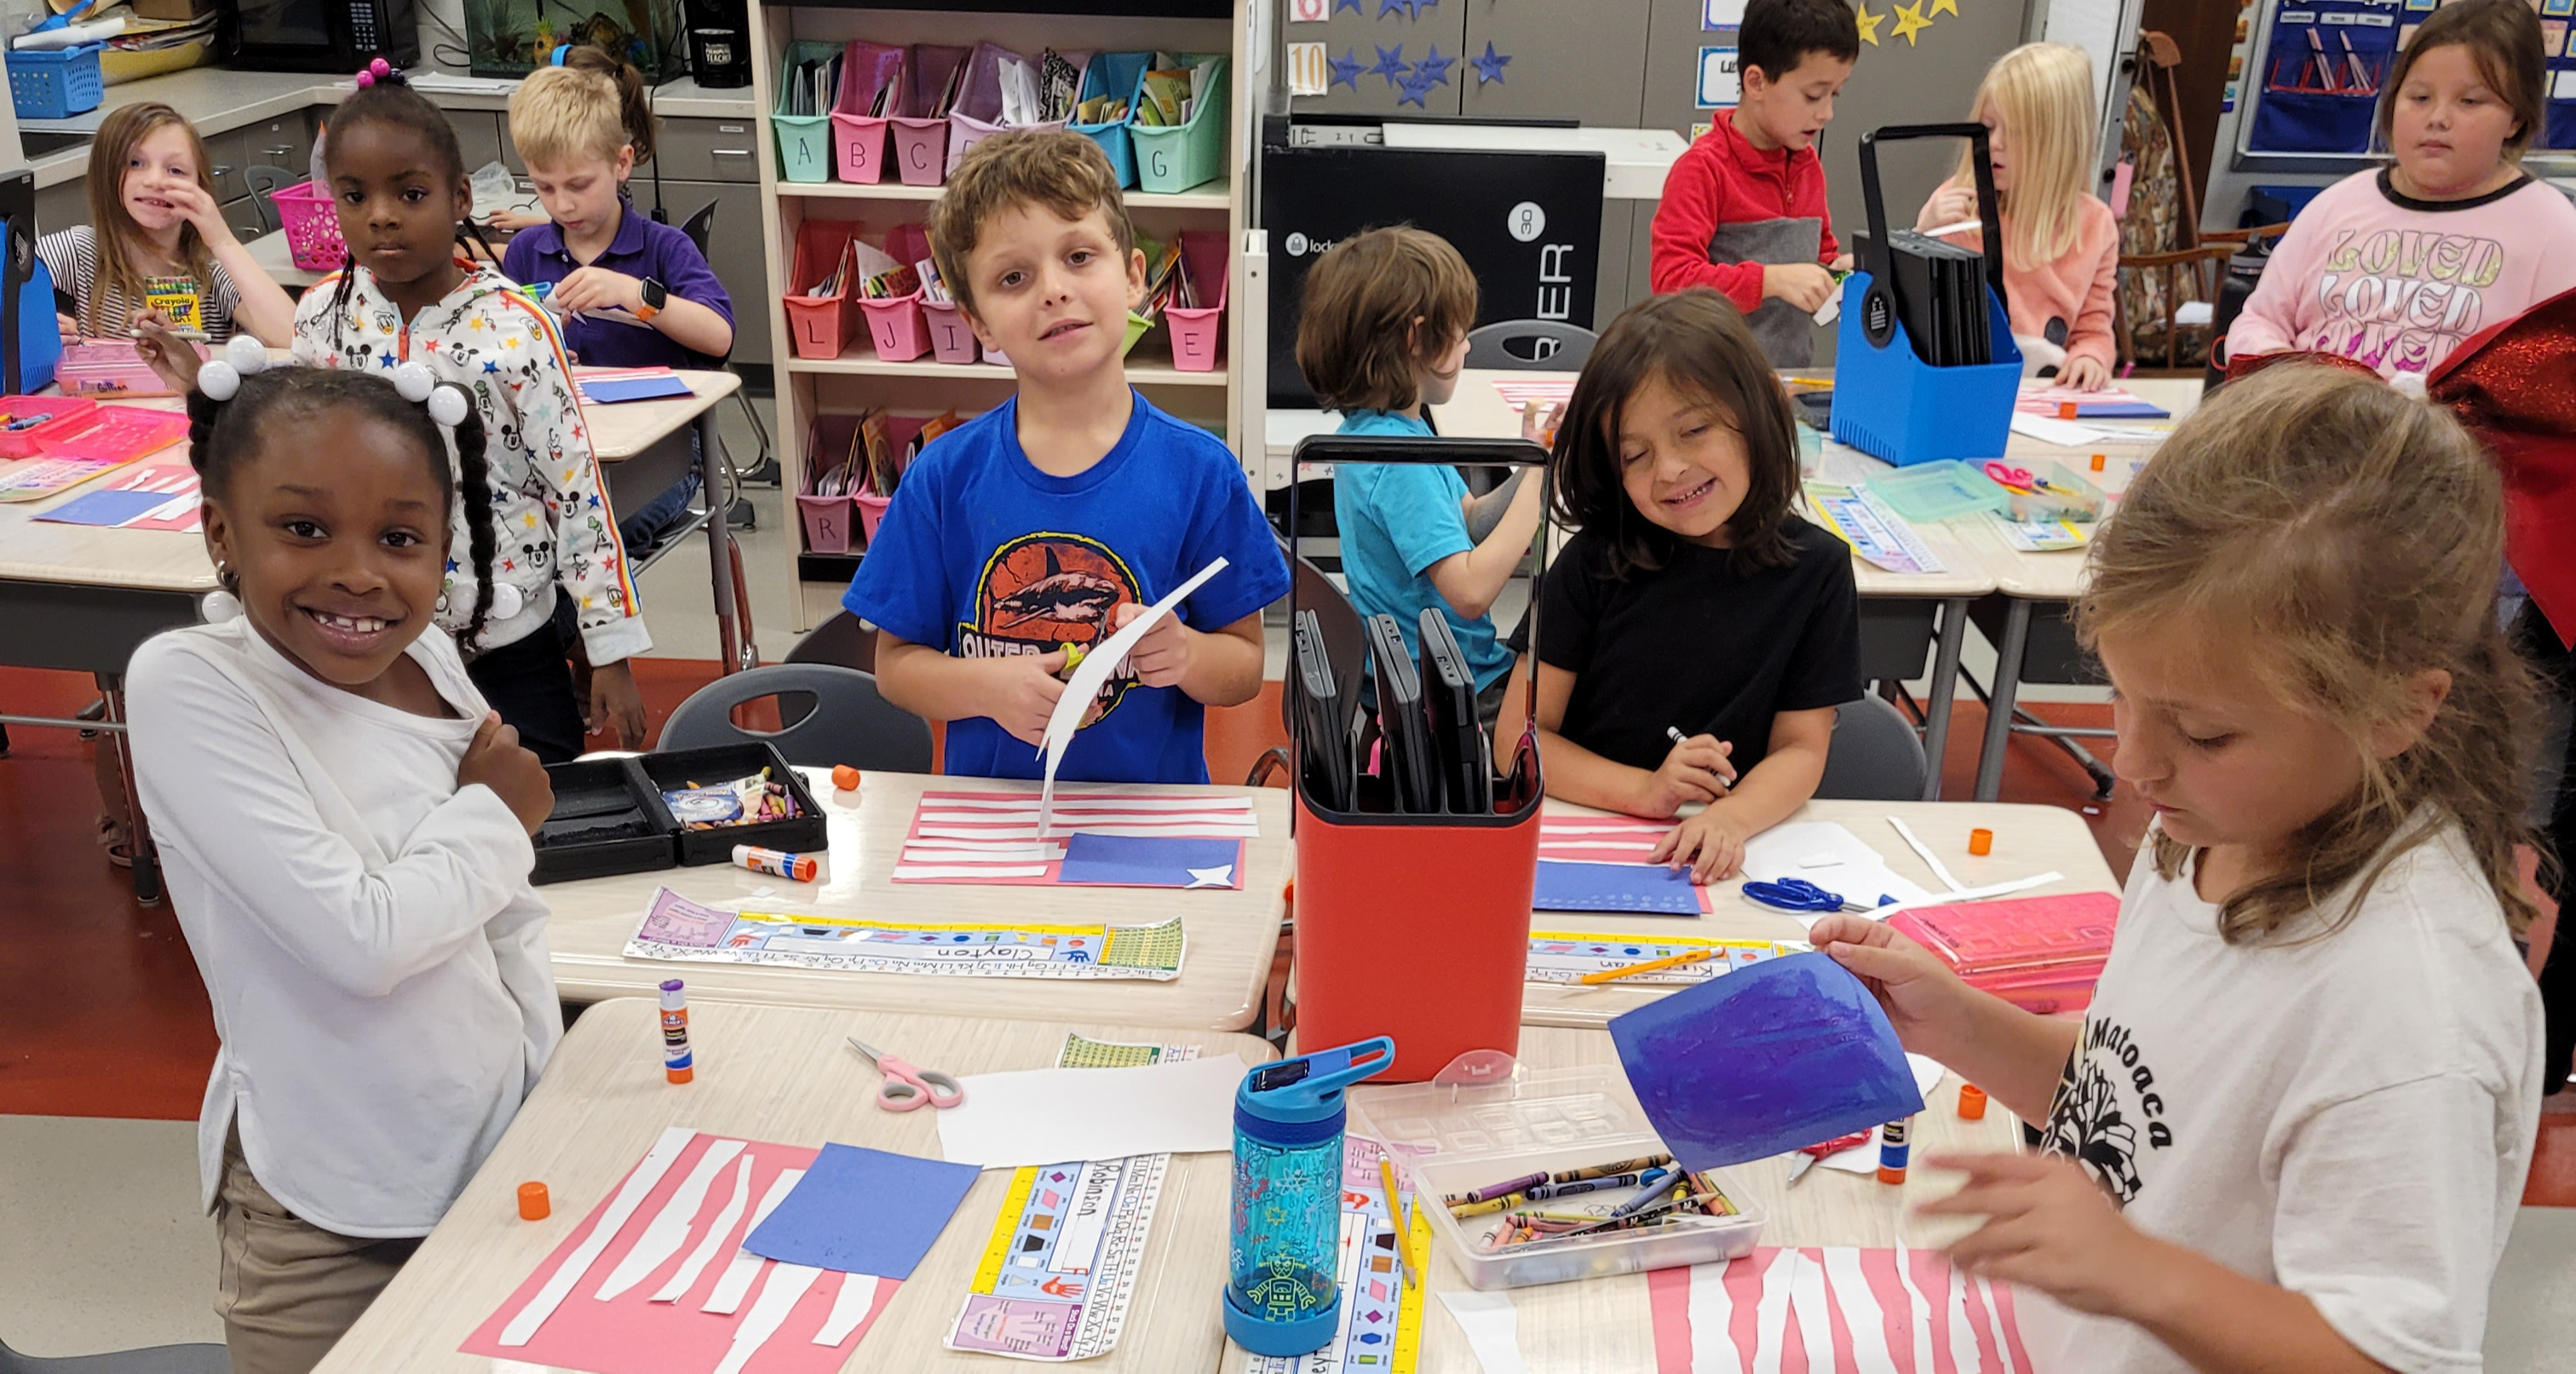 A group of student creating the U.S. flag with construction paper